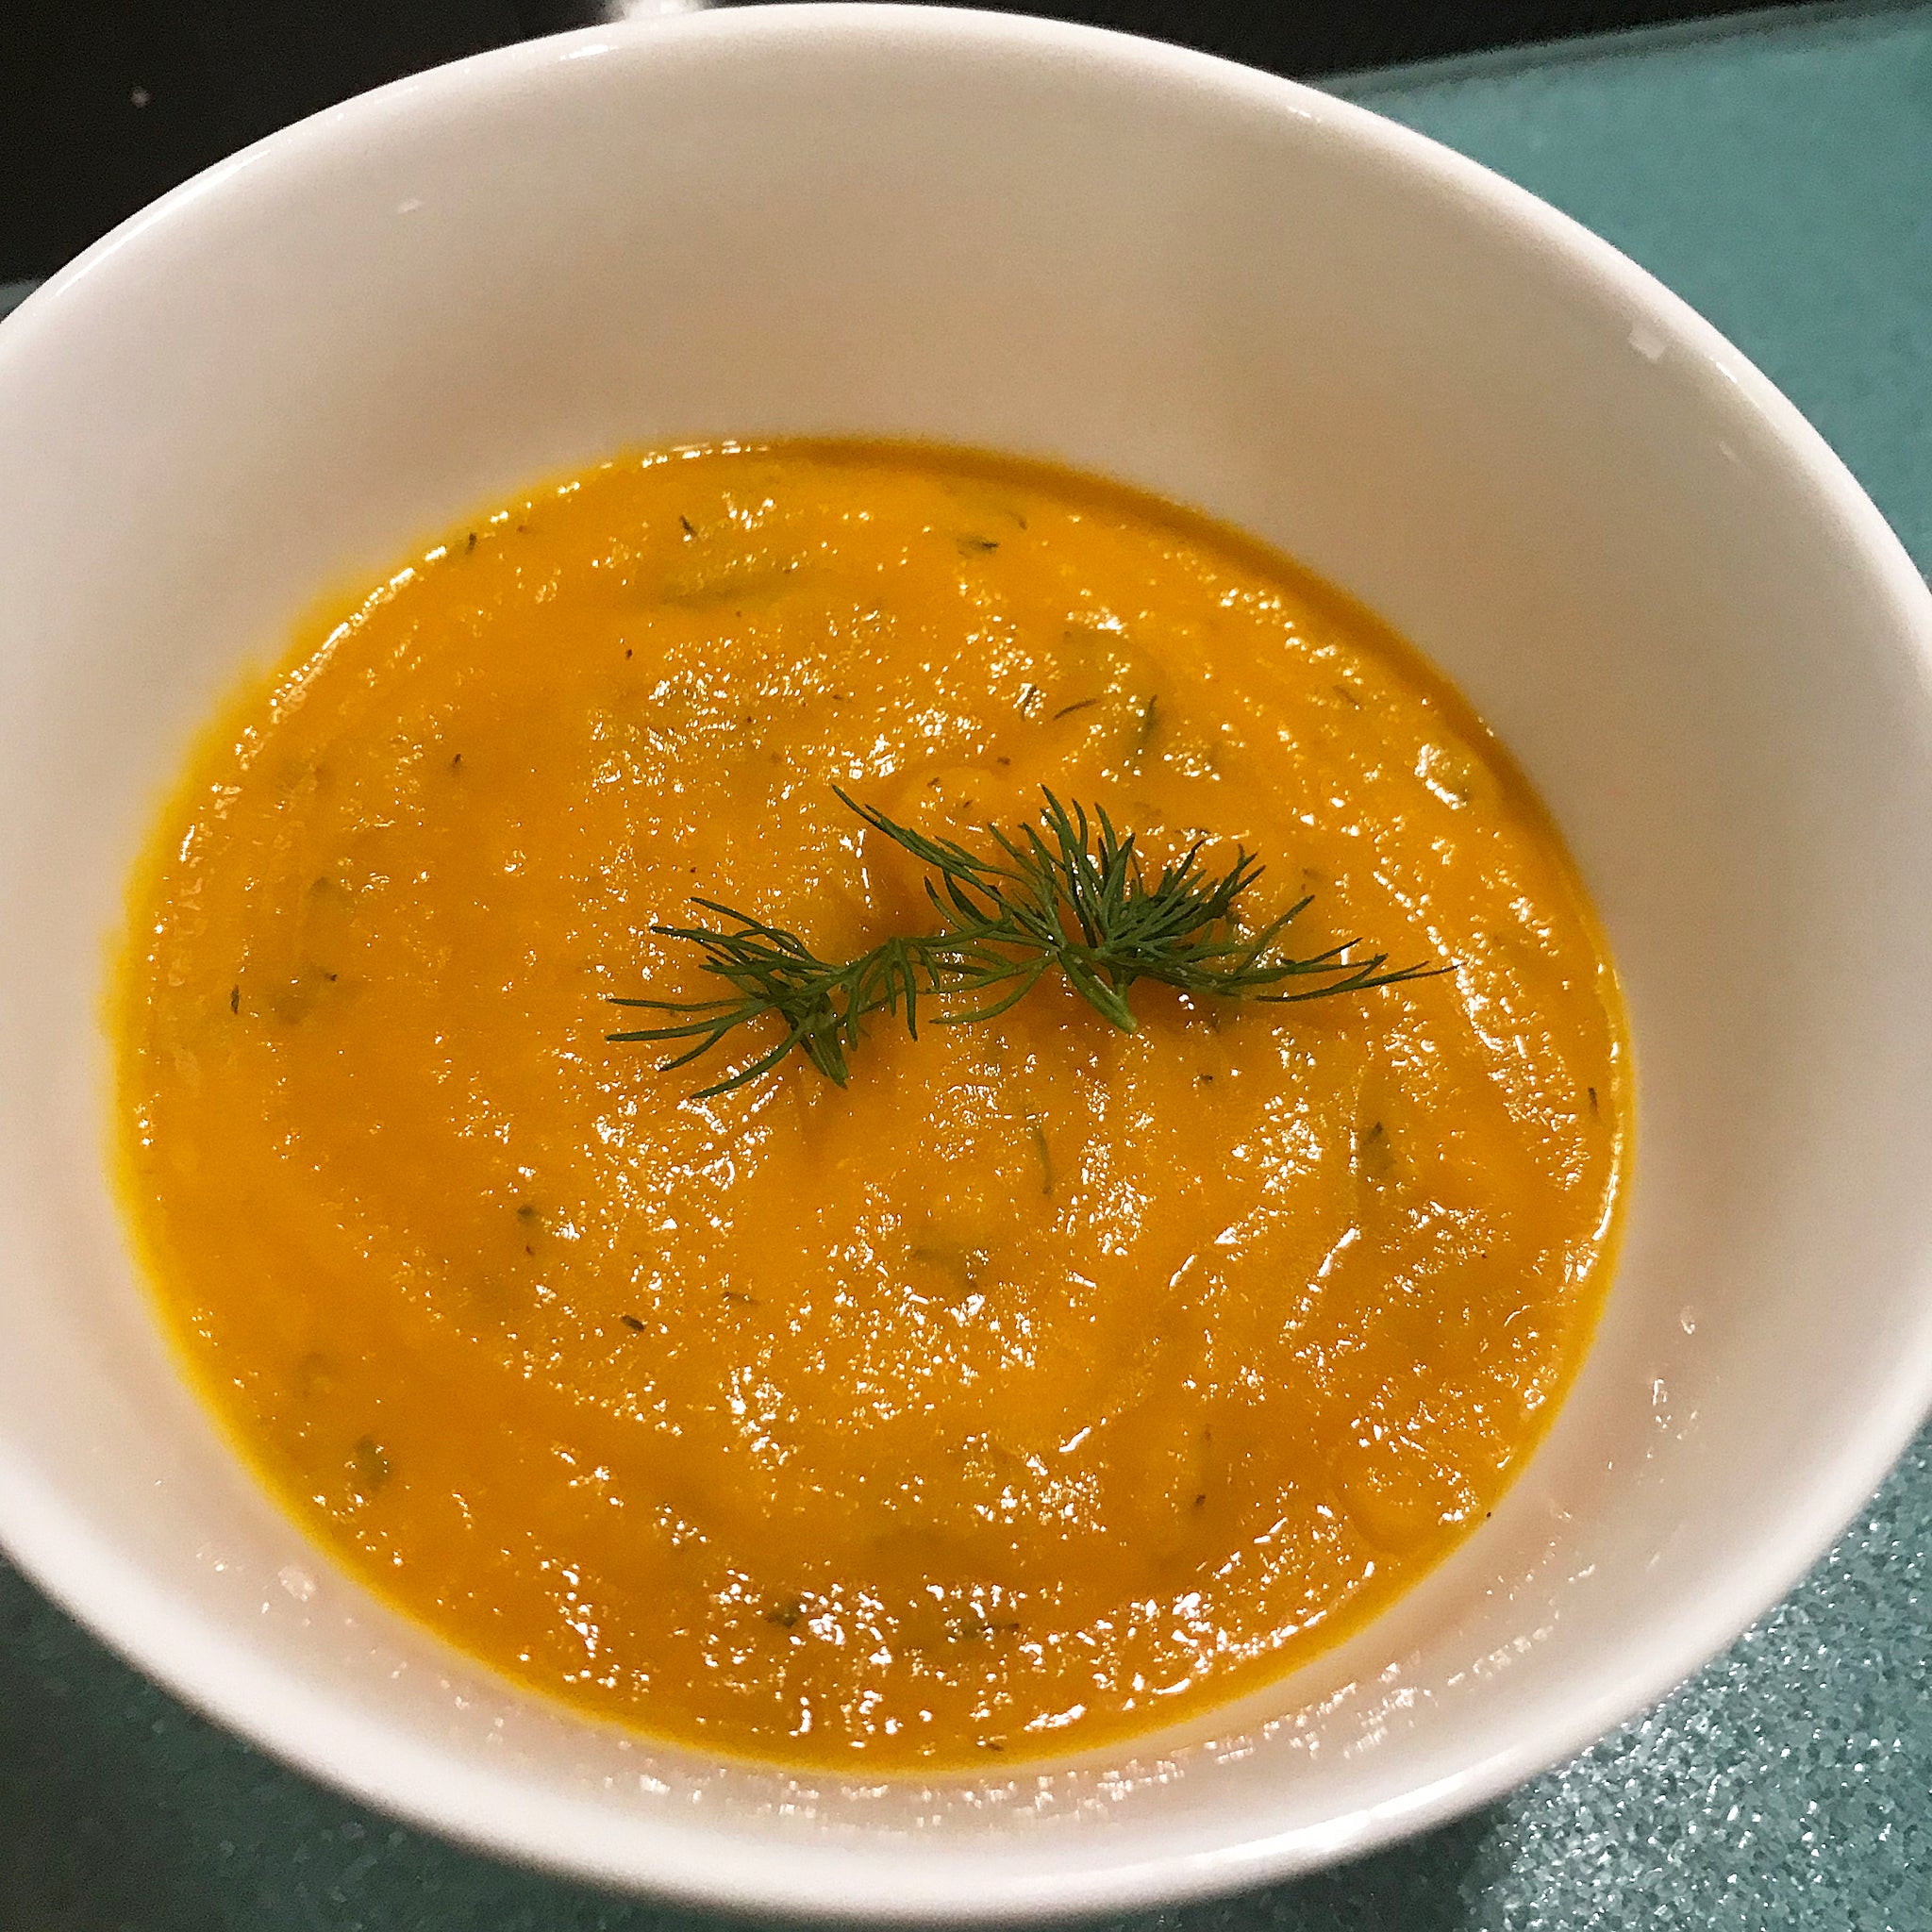 Carrot Dill Soup